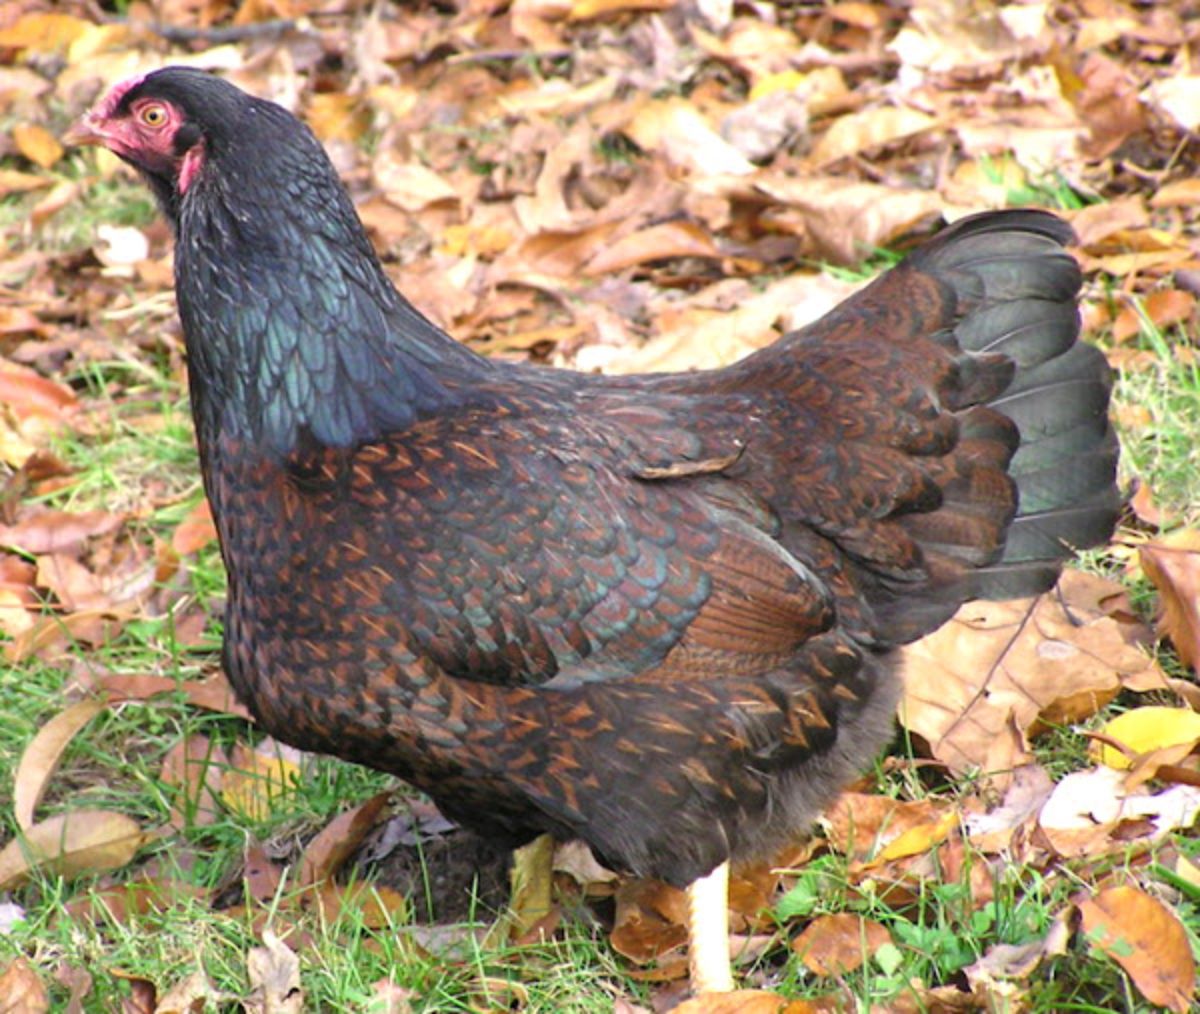 A beautiful Cornish Chicken in a fallen-leaves-covered backyard.